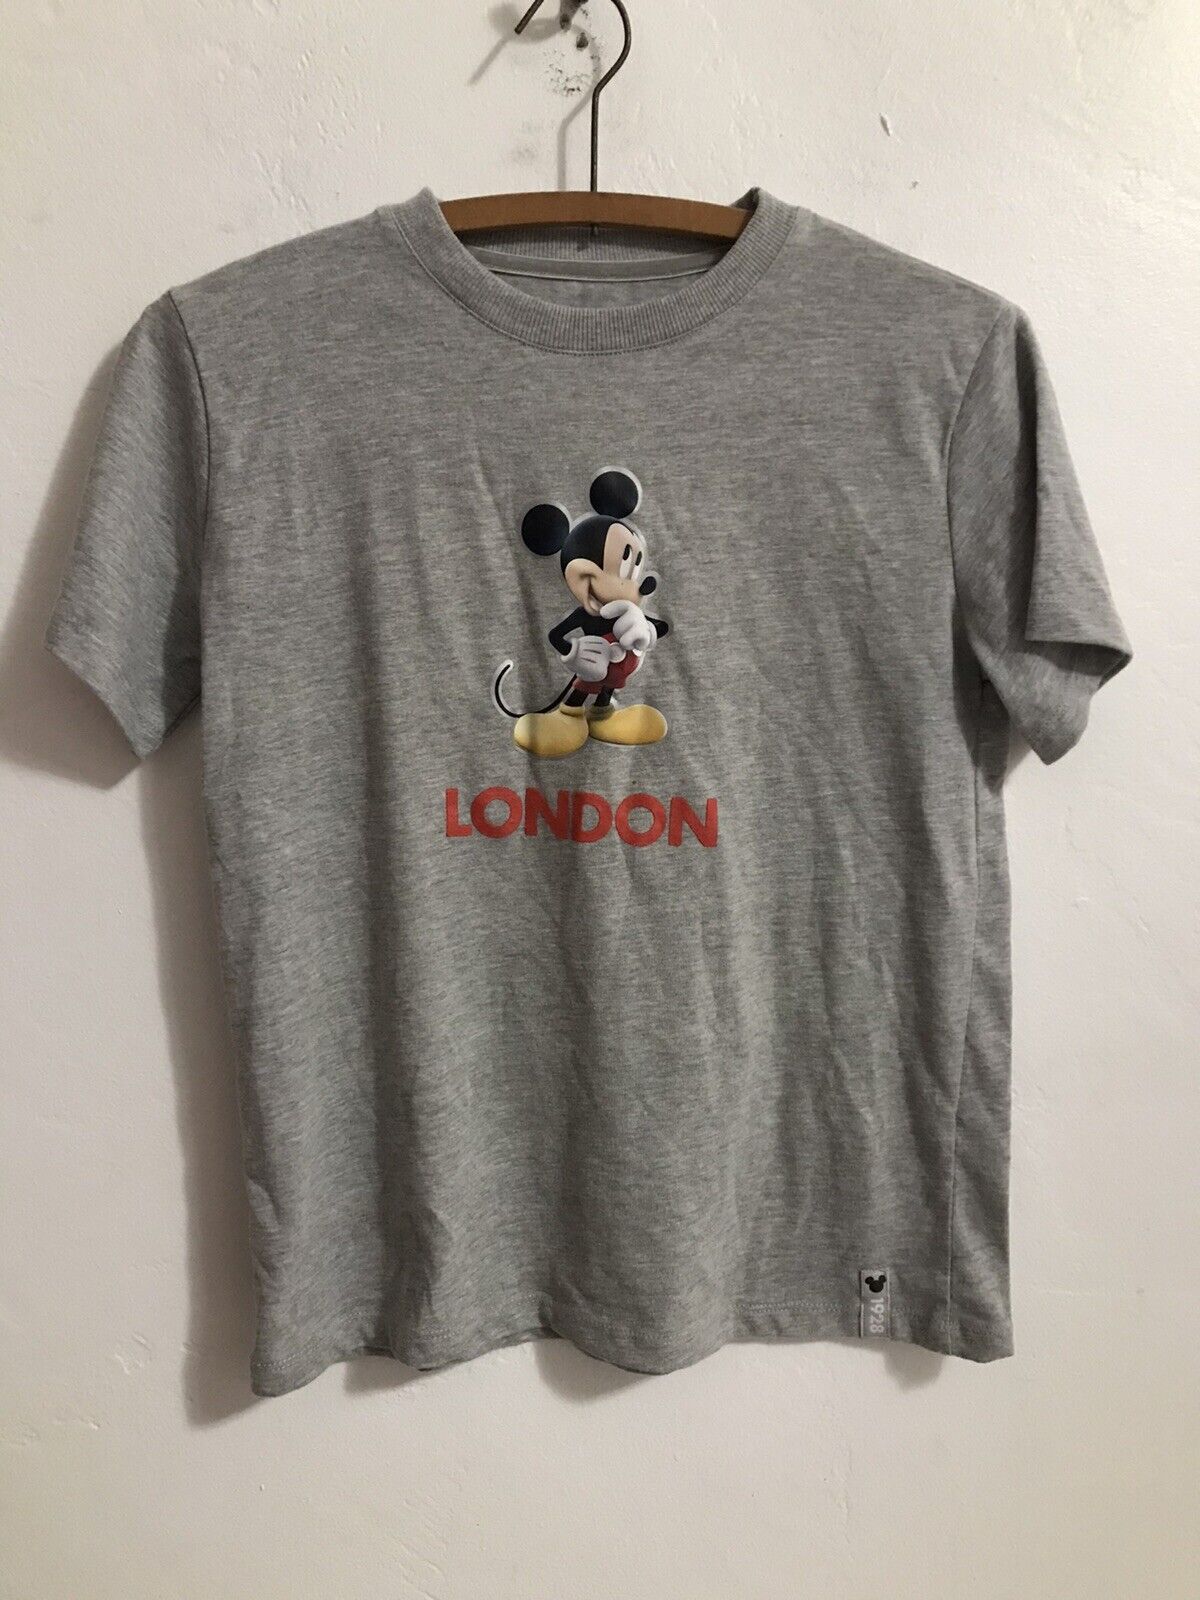 Disney Store Mickey Mouse Kids T-Shirt Gray Short Sleeve Size 11-12 Years